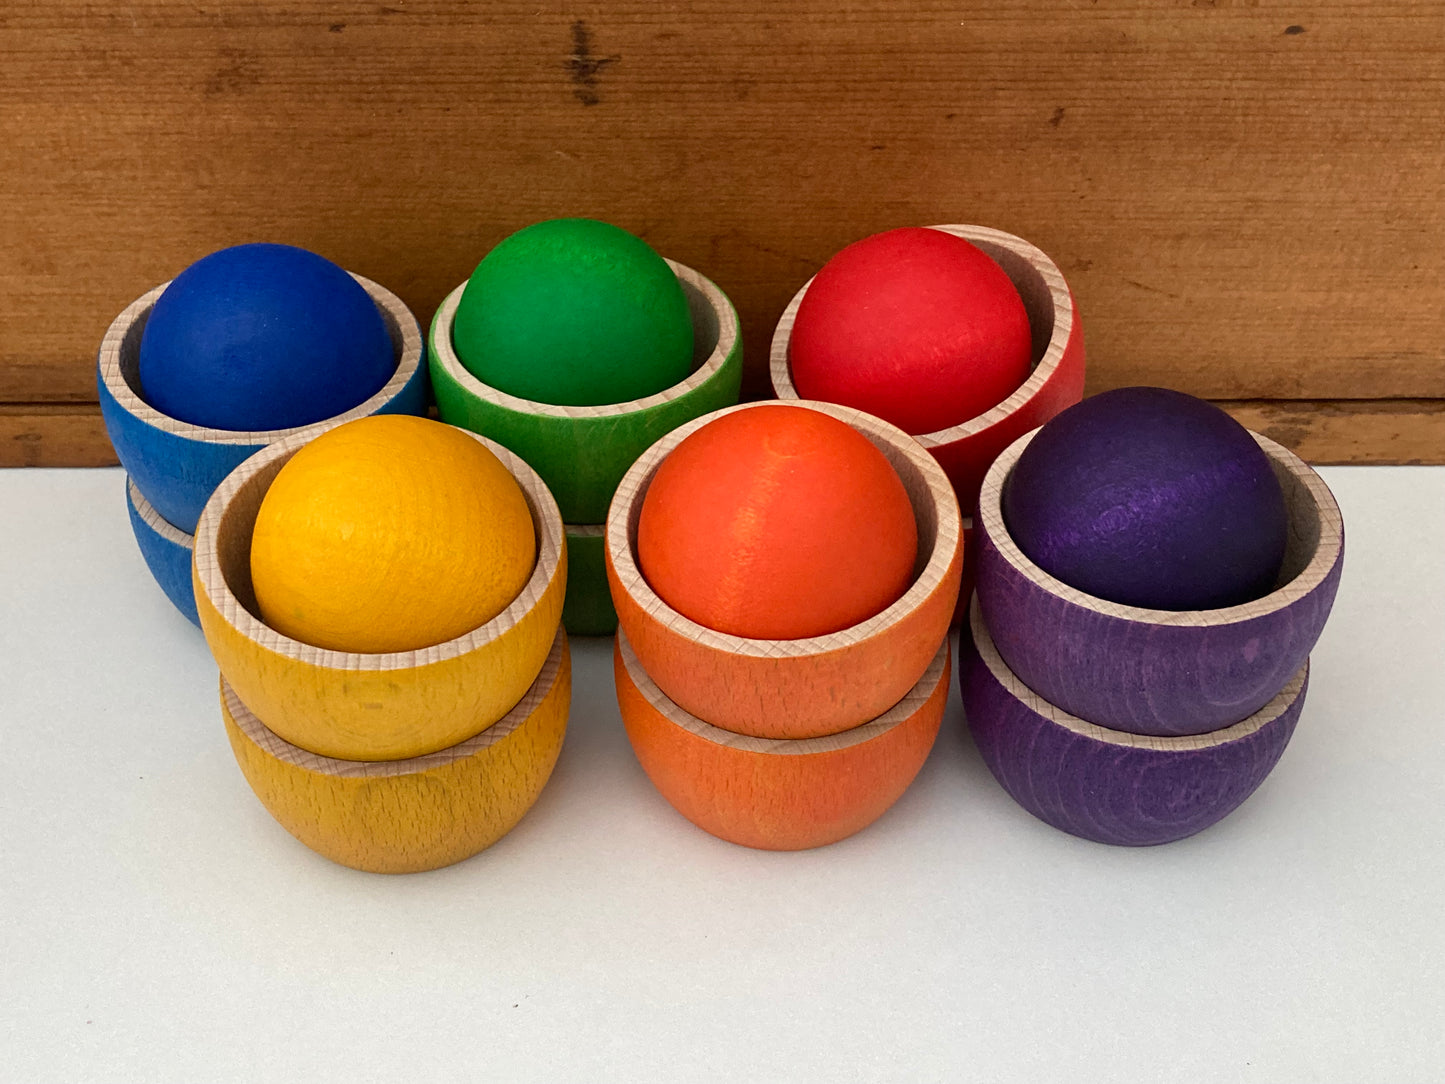 Wooden Toy - Rainbow BOWLS AND BALLS by Grapat, 18 pieces!